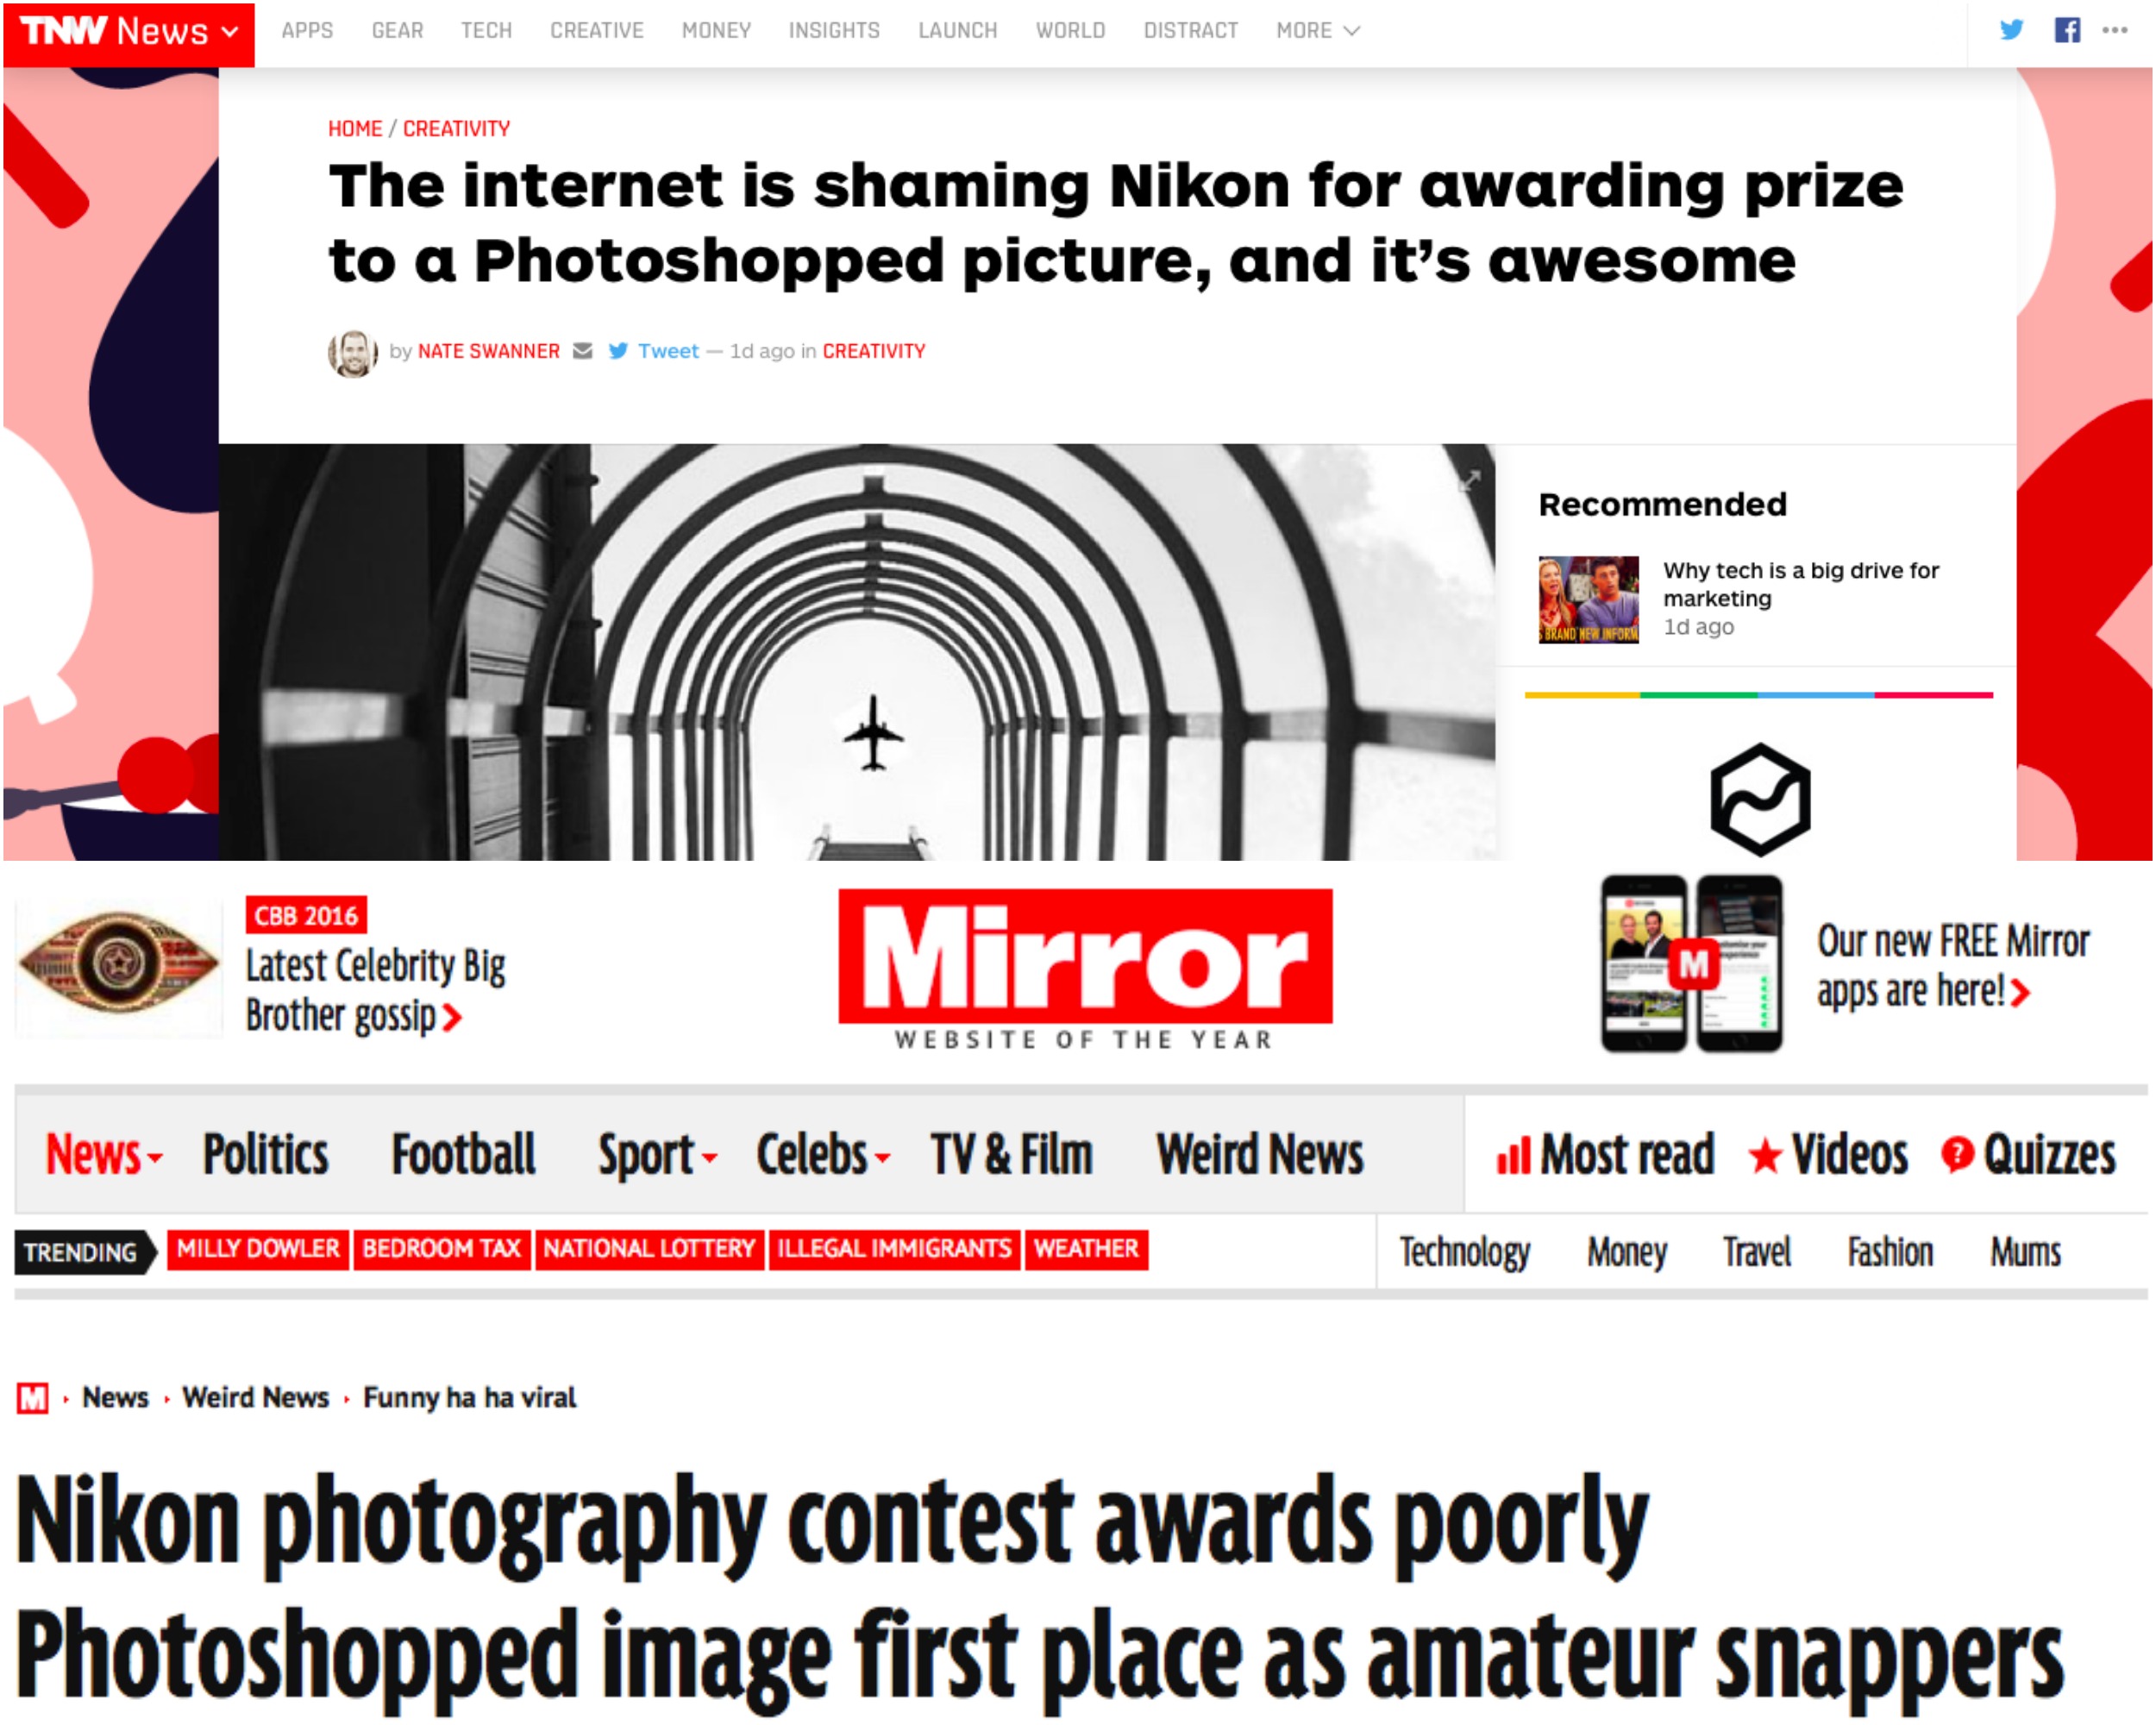 Here's a sampling of headlines from The Mirror (UK) and The Next Web (US)